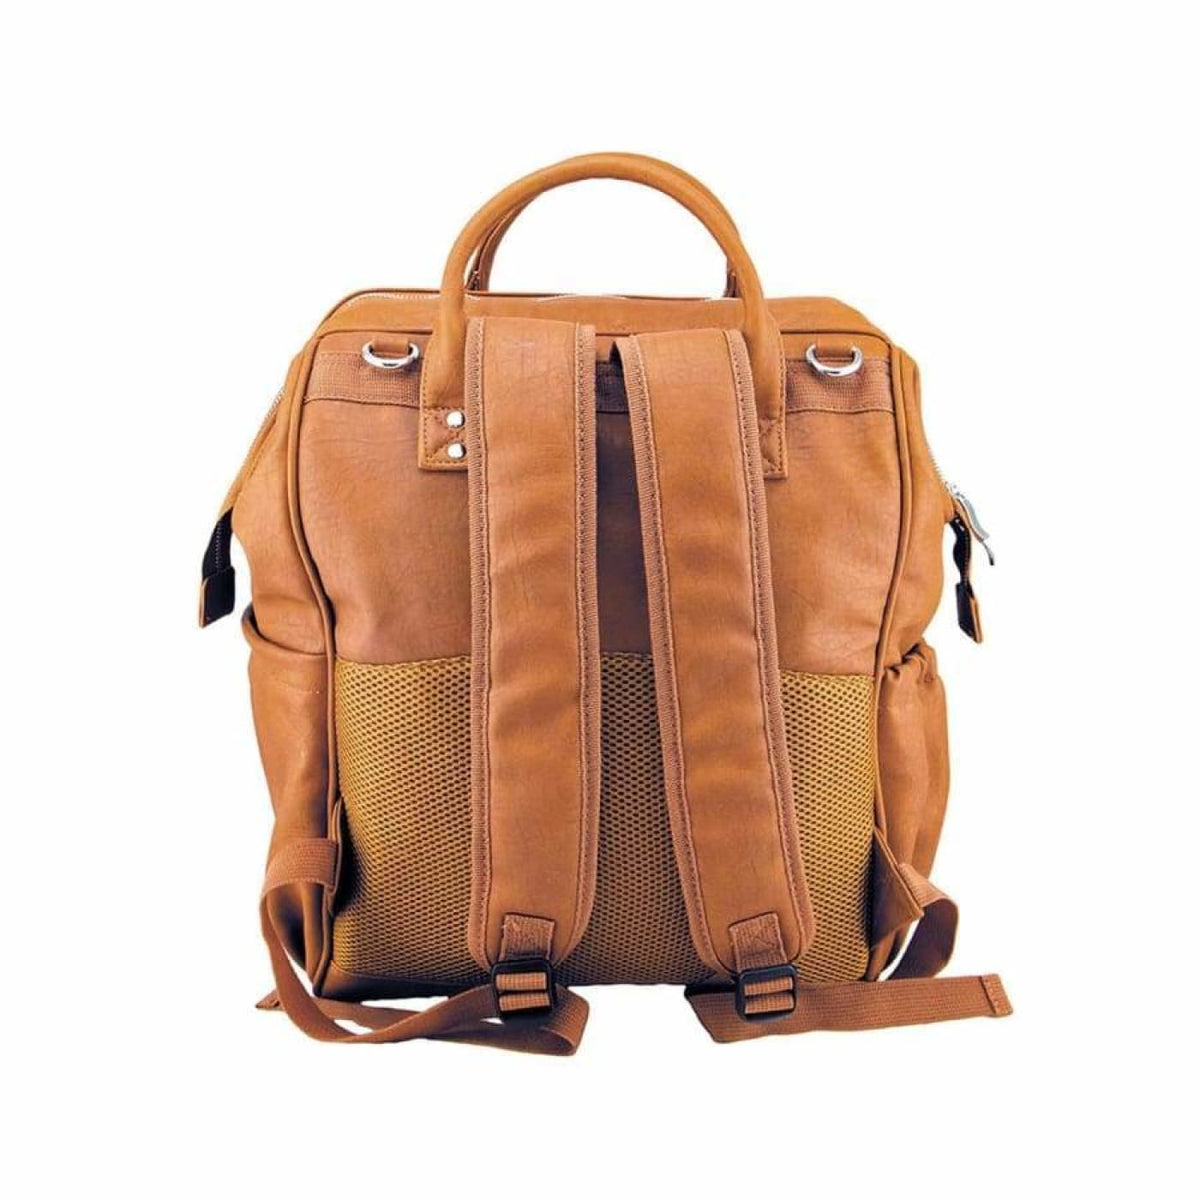 Isoki Byron Backpack - Amber - Amber - ON THE GO - NAPPY BAGS/LUGGAGE